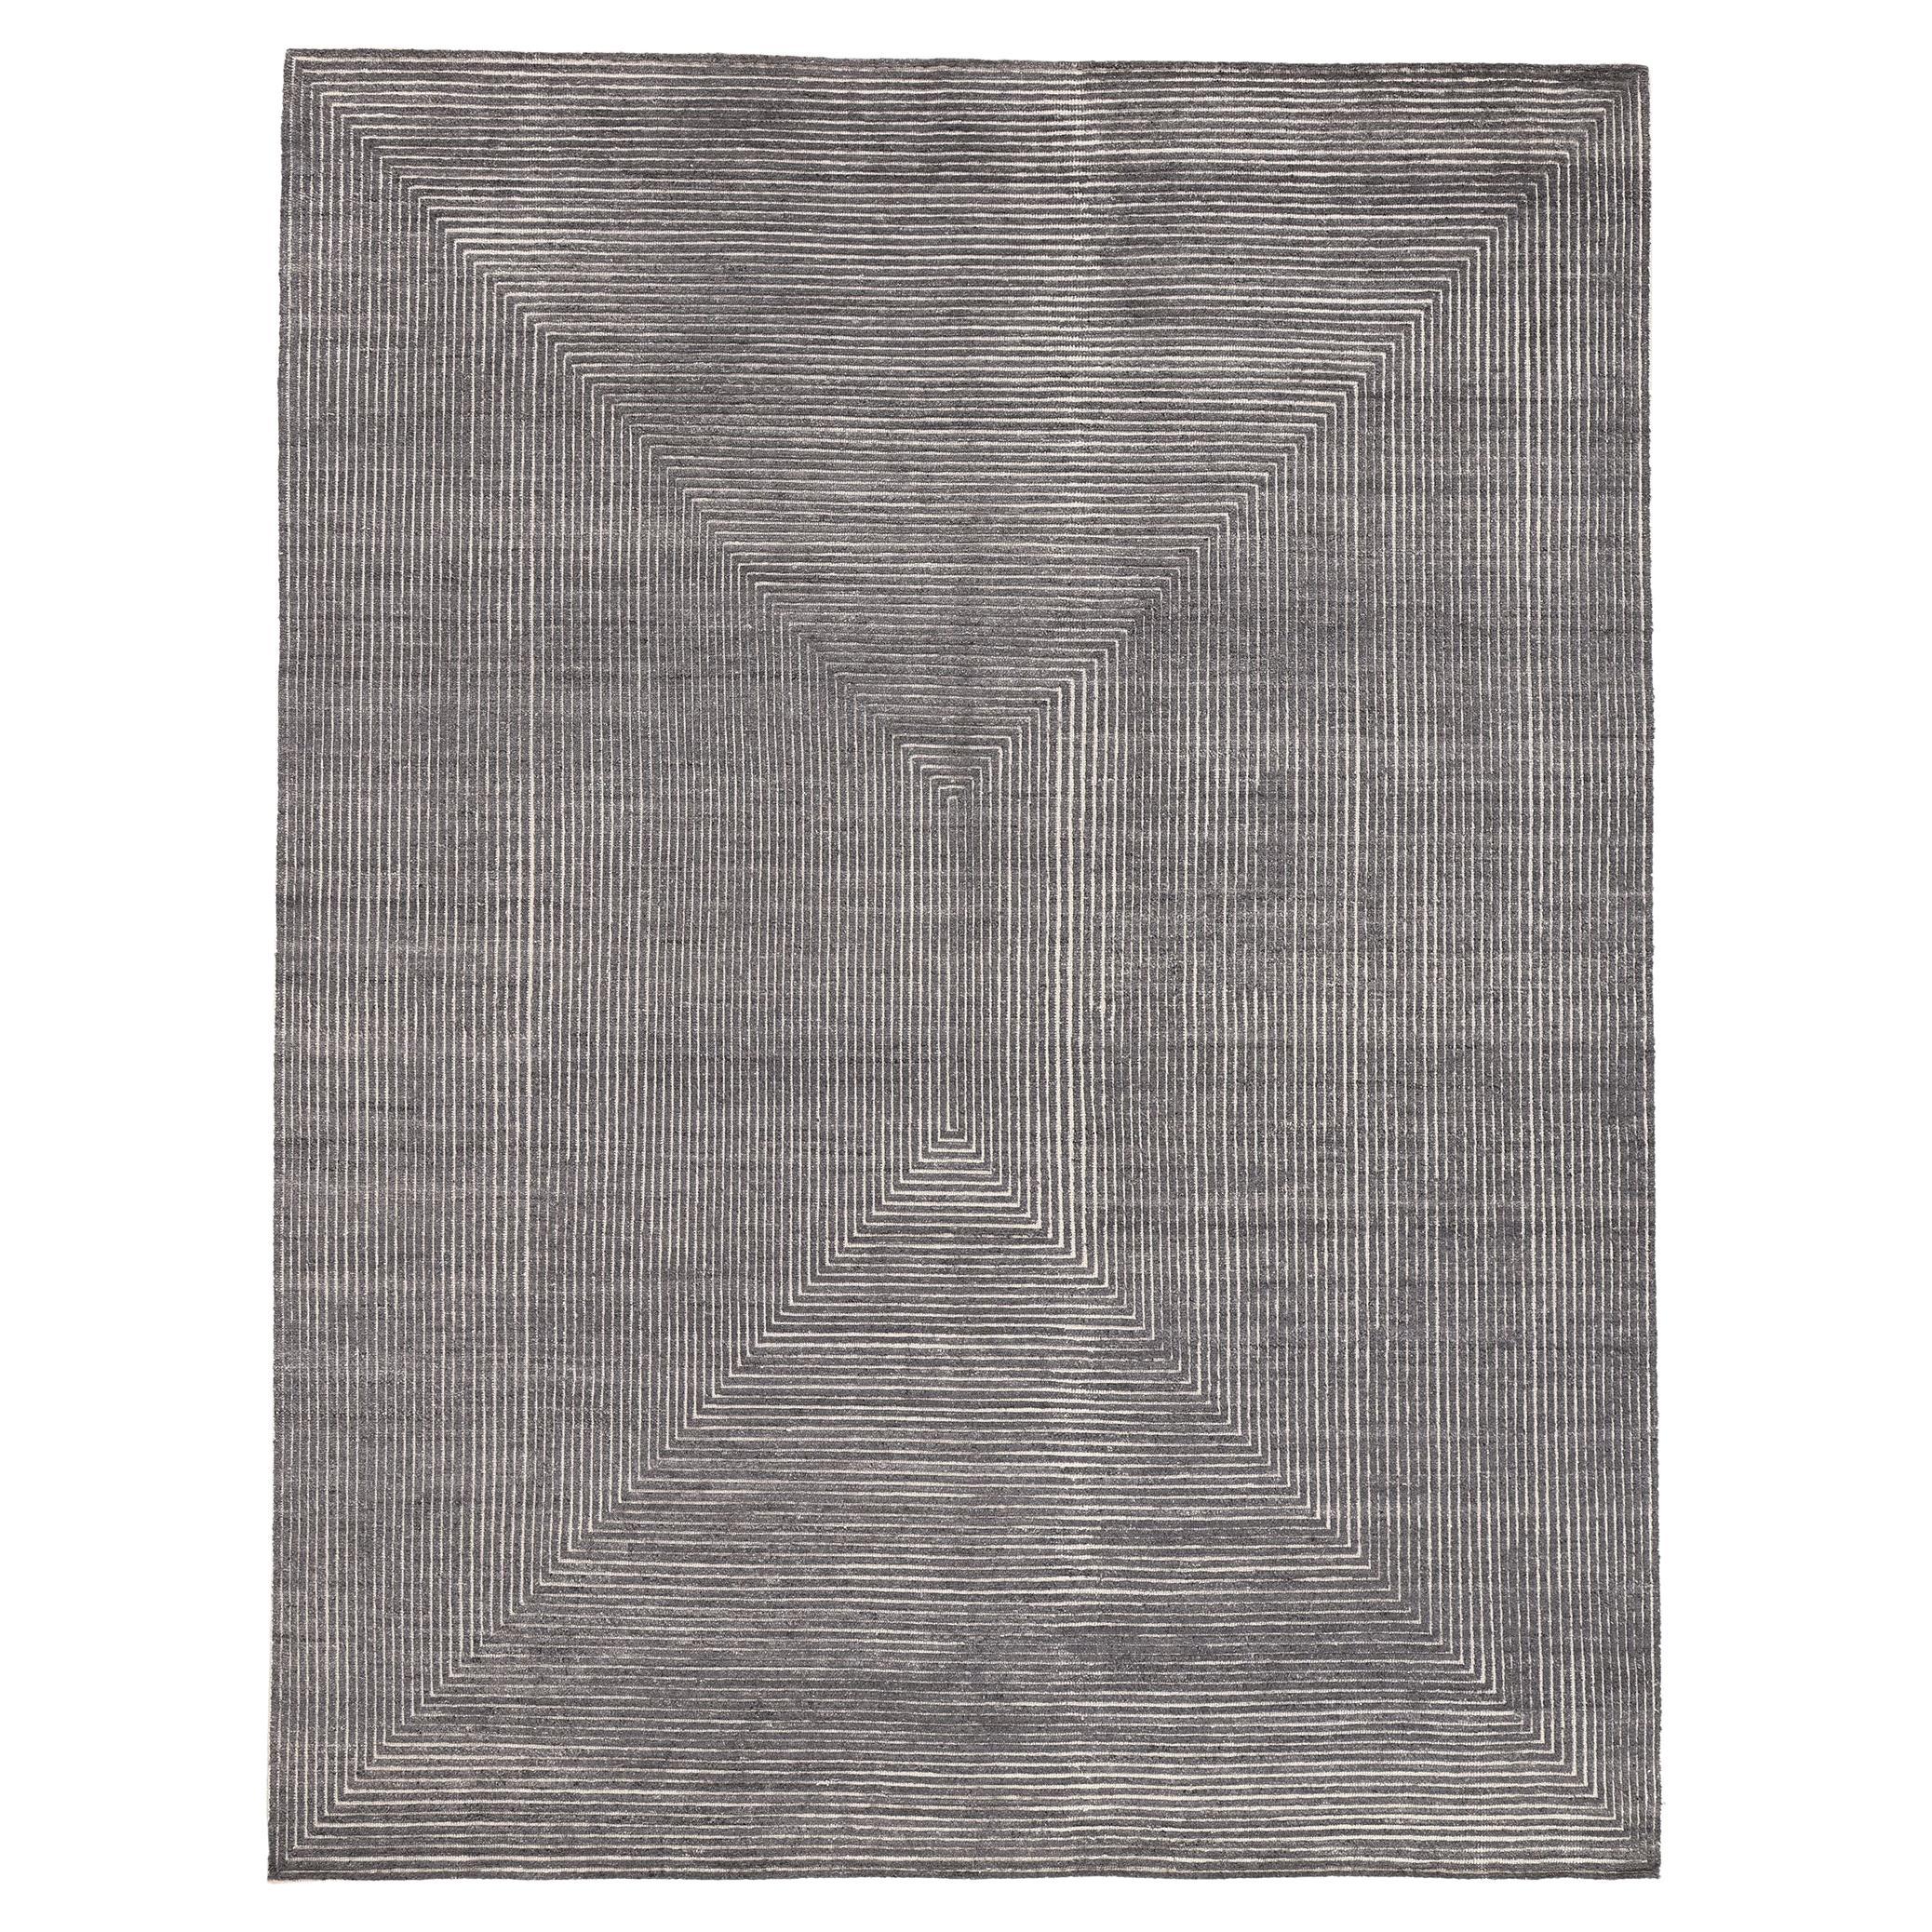 Modern Gray Opt Art High-Low Rug, Sublime Simplicity Meets Tantalizing Texture For Sale